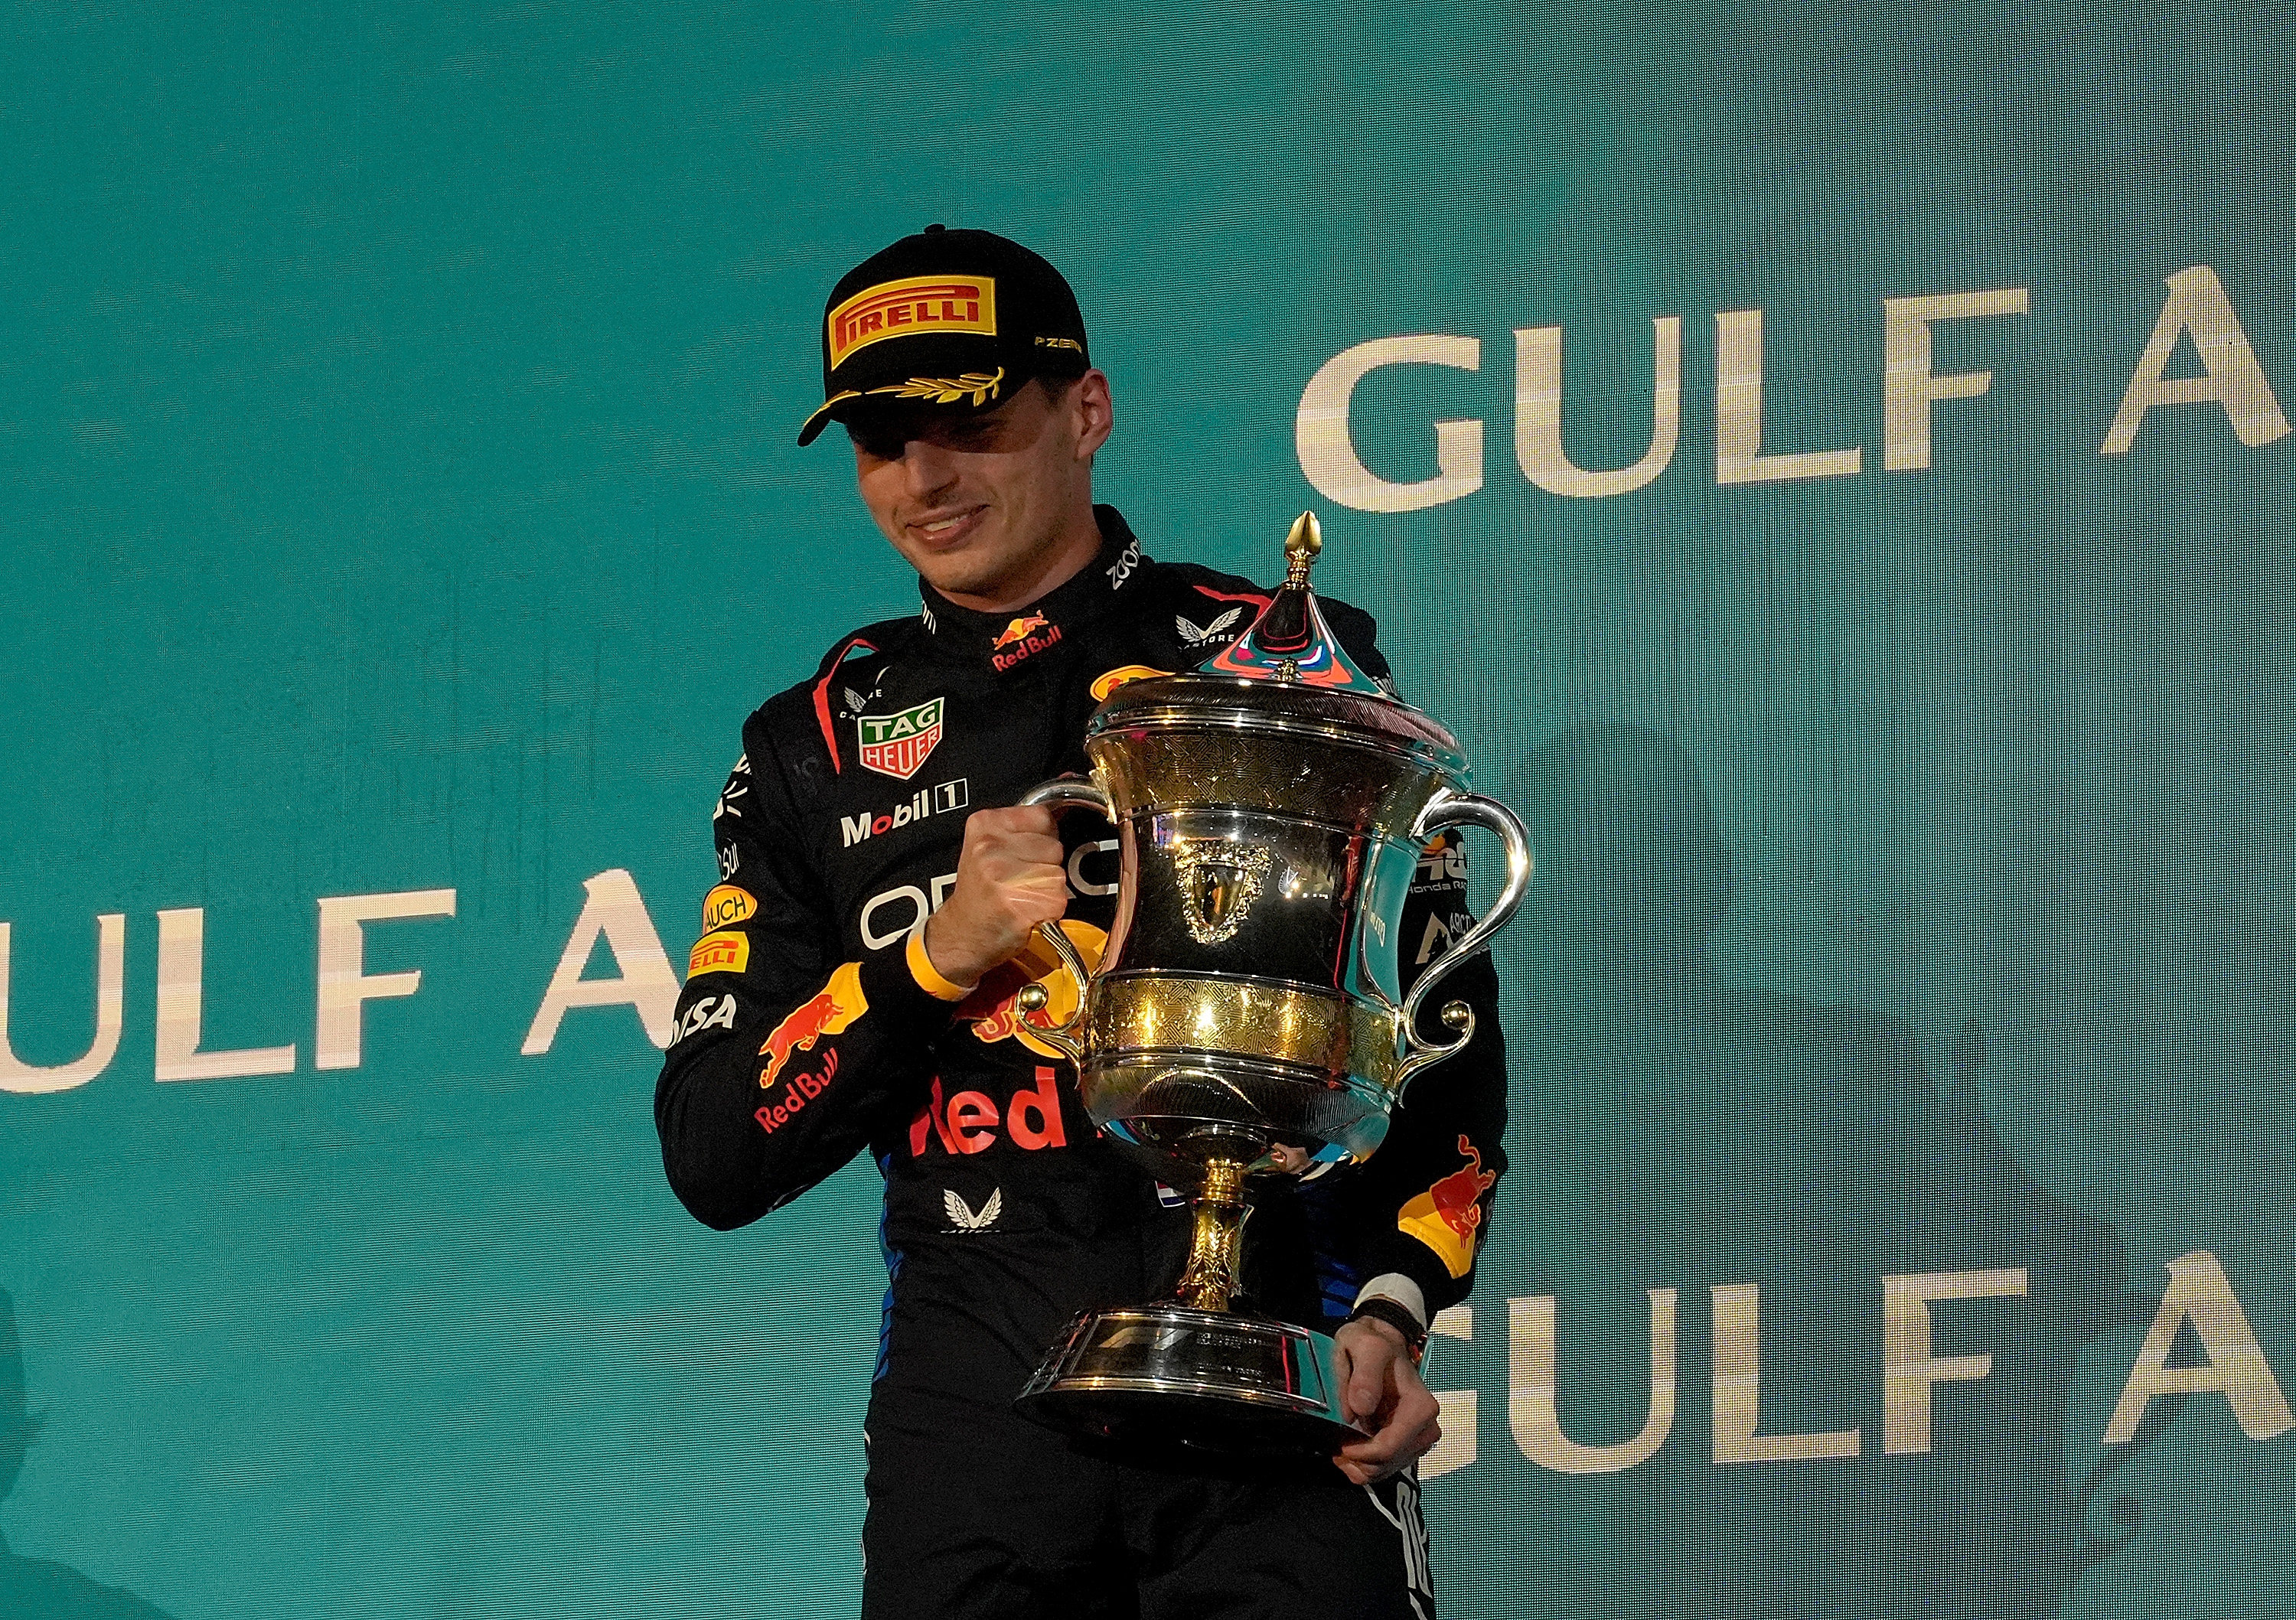 Red Bull’s Max Verstappen celebrates on the podium after winning the Bahrain Grand Prix. Photo: DPA